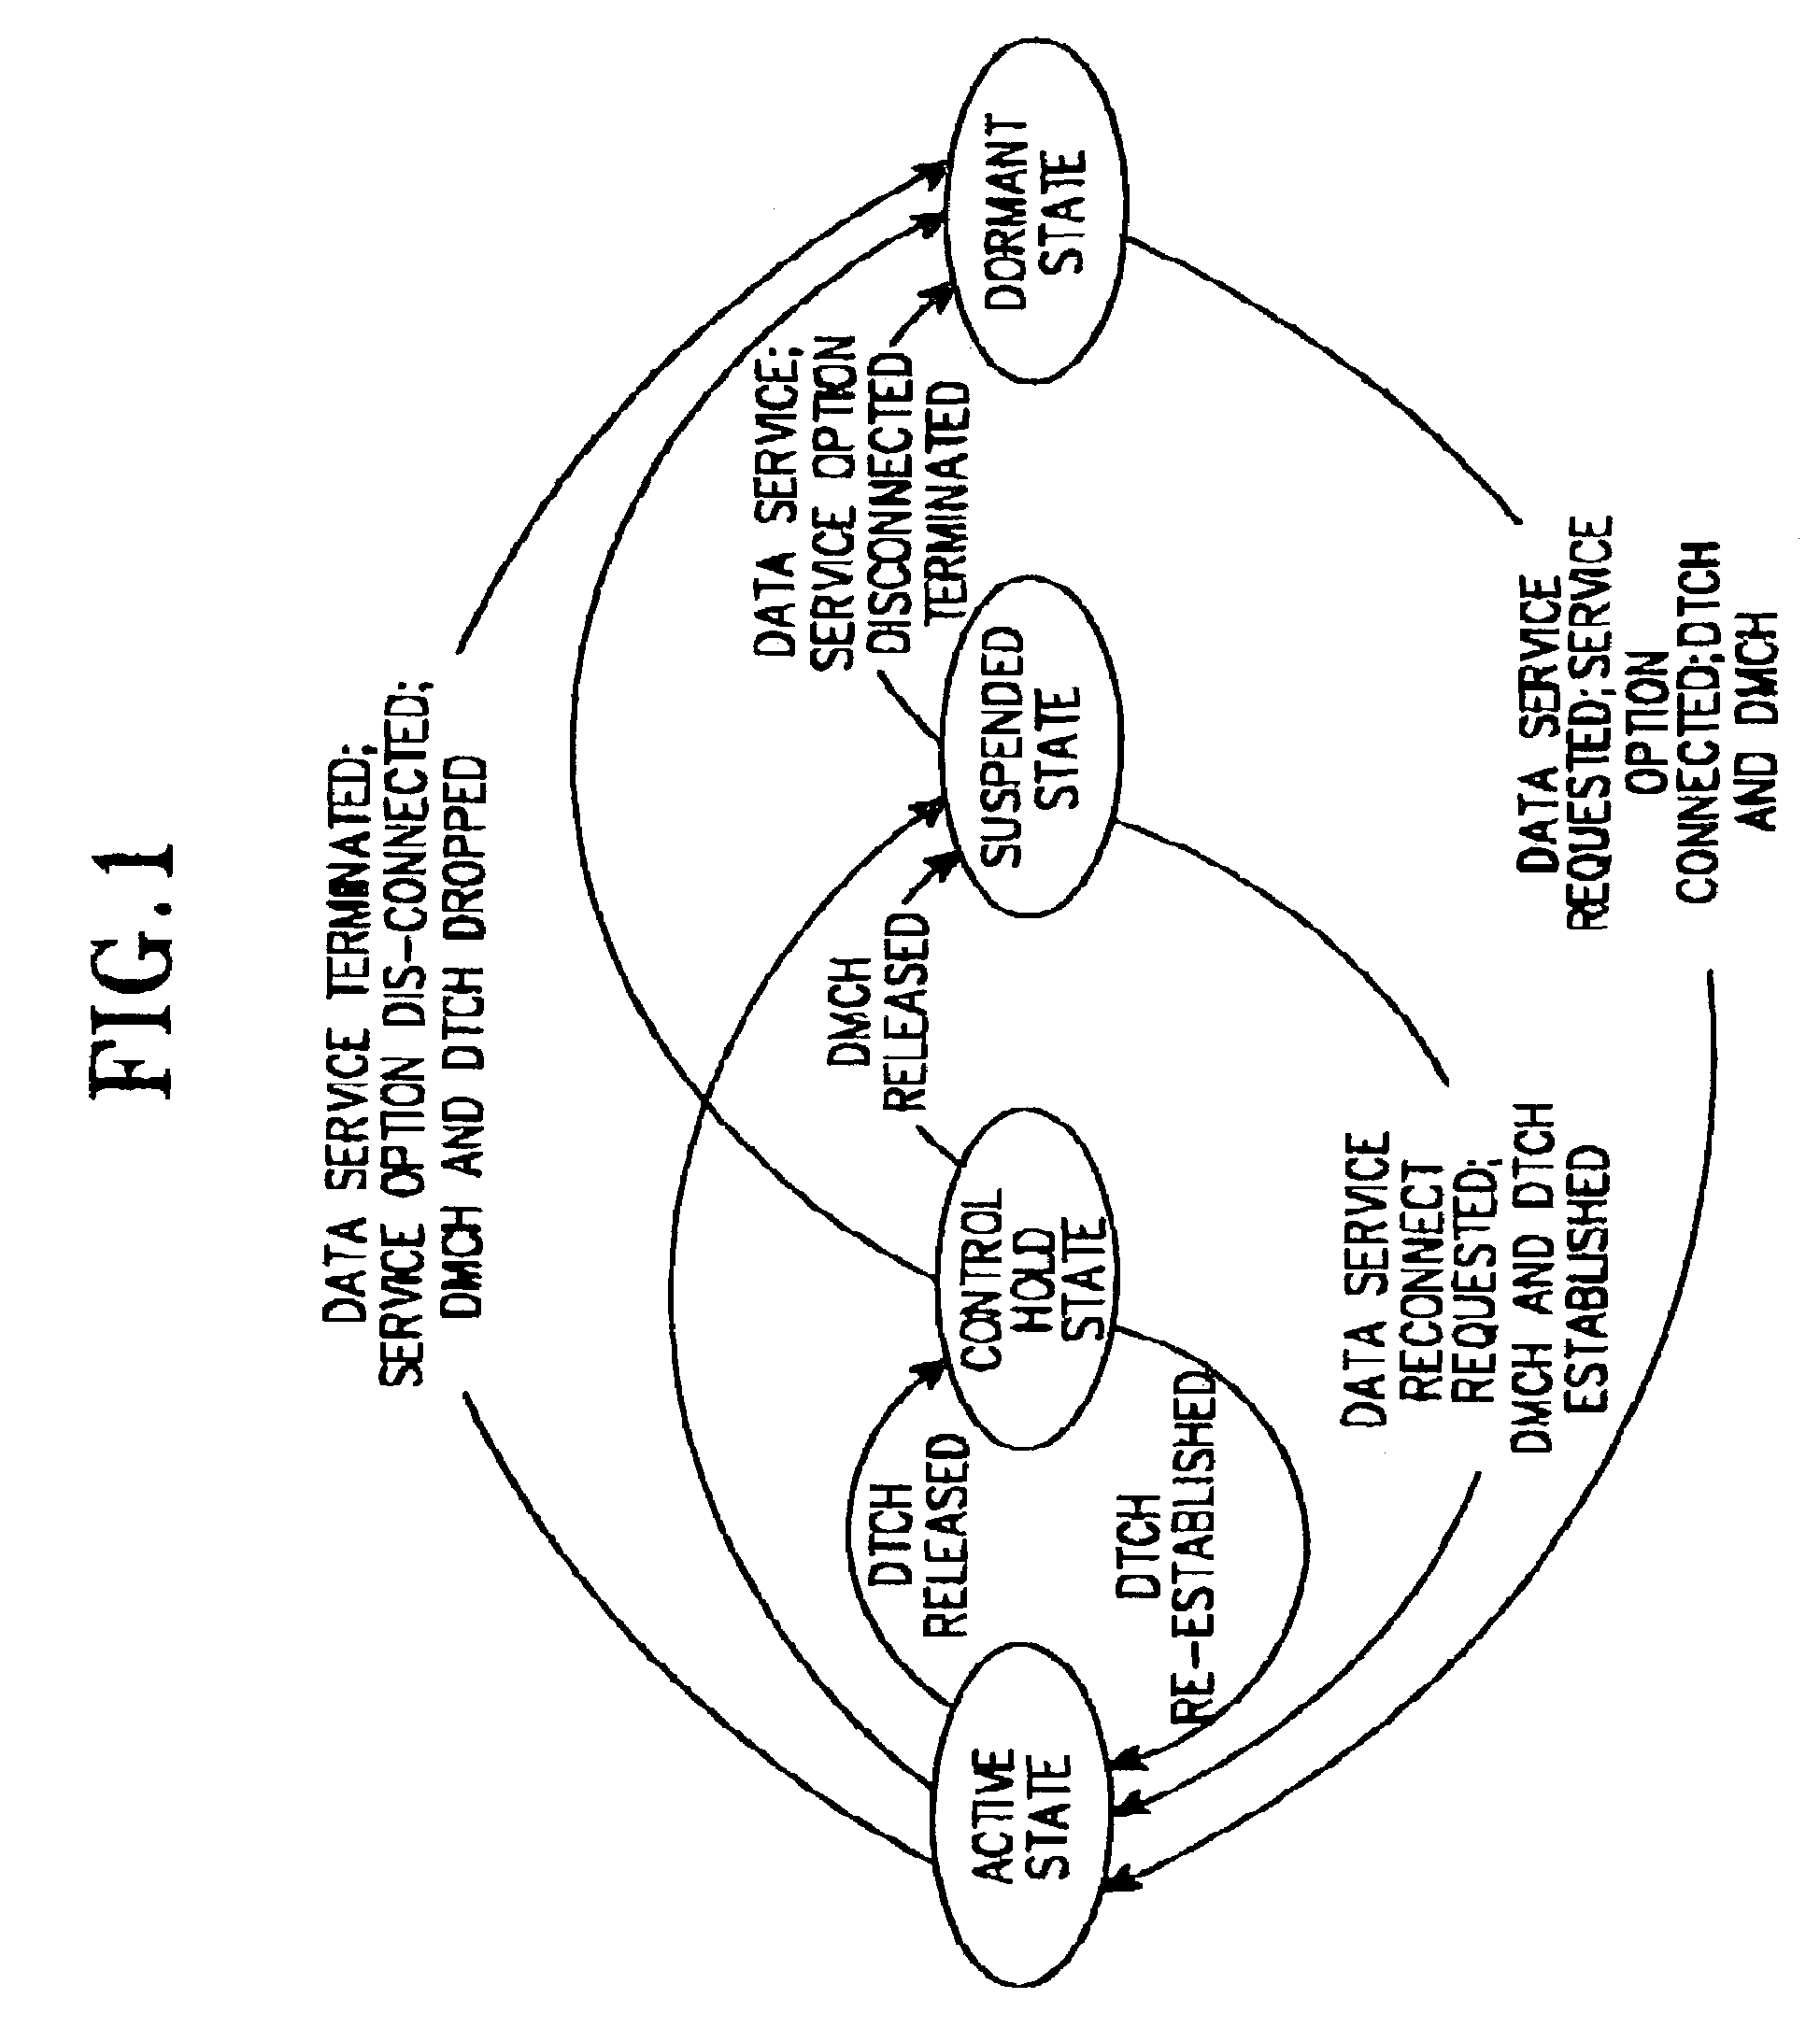 Device and method for gating transmission in a CDMA mobile communication system